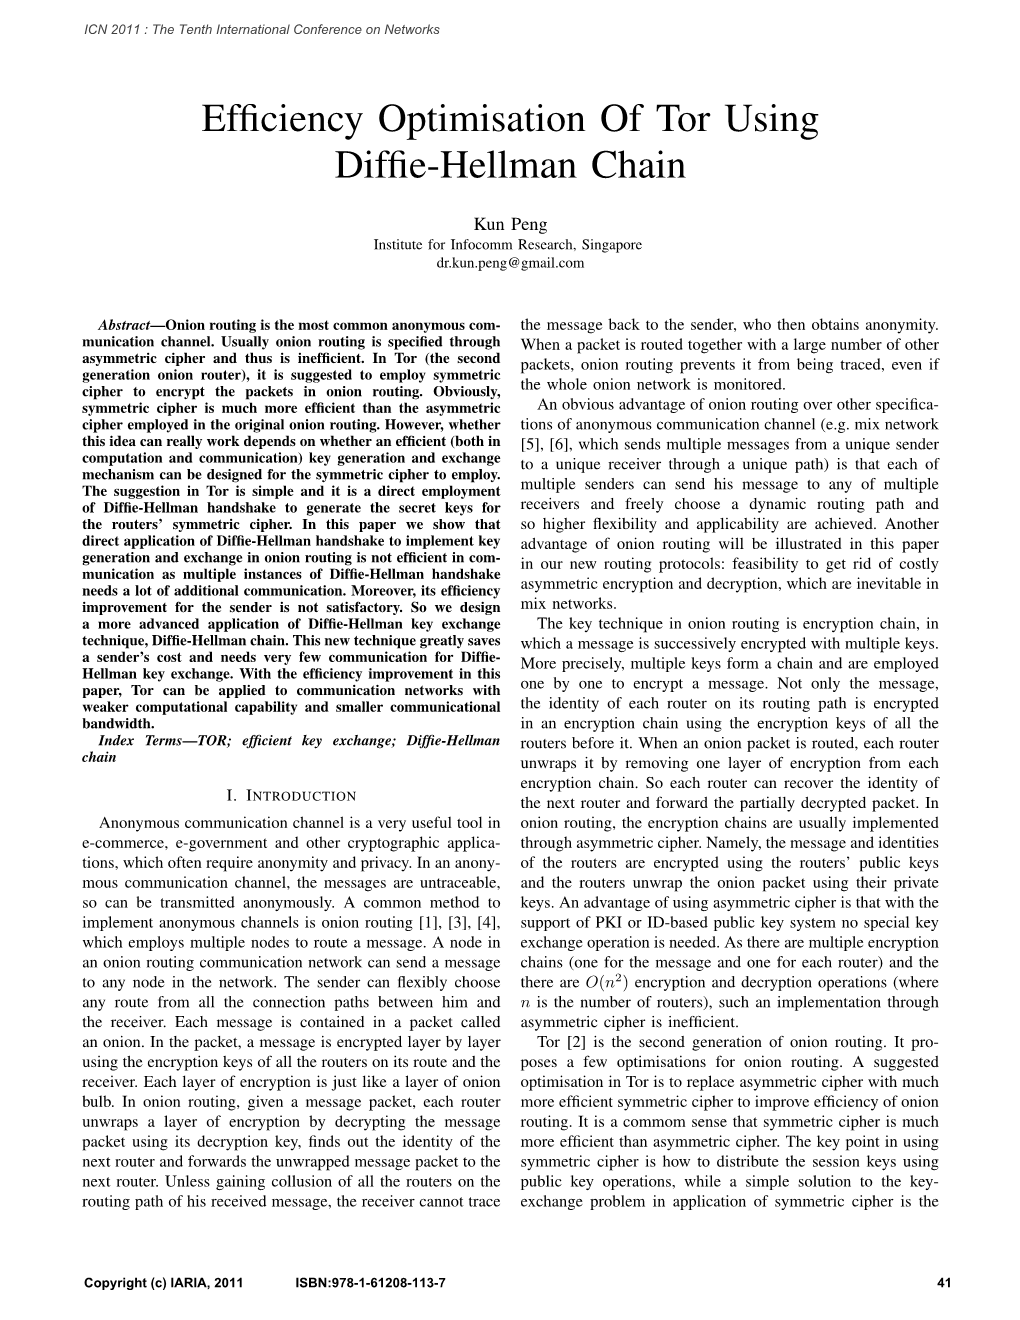 Efficiency Optimisation of Tor Using Diffie-Hellman Chain